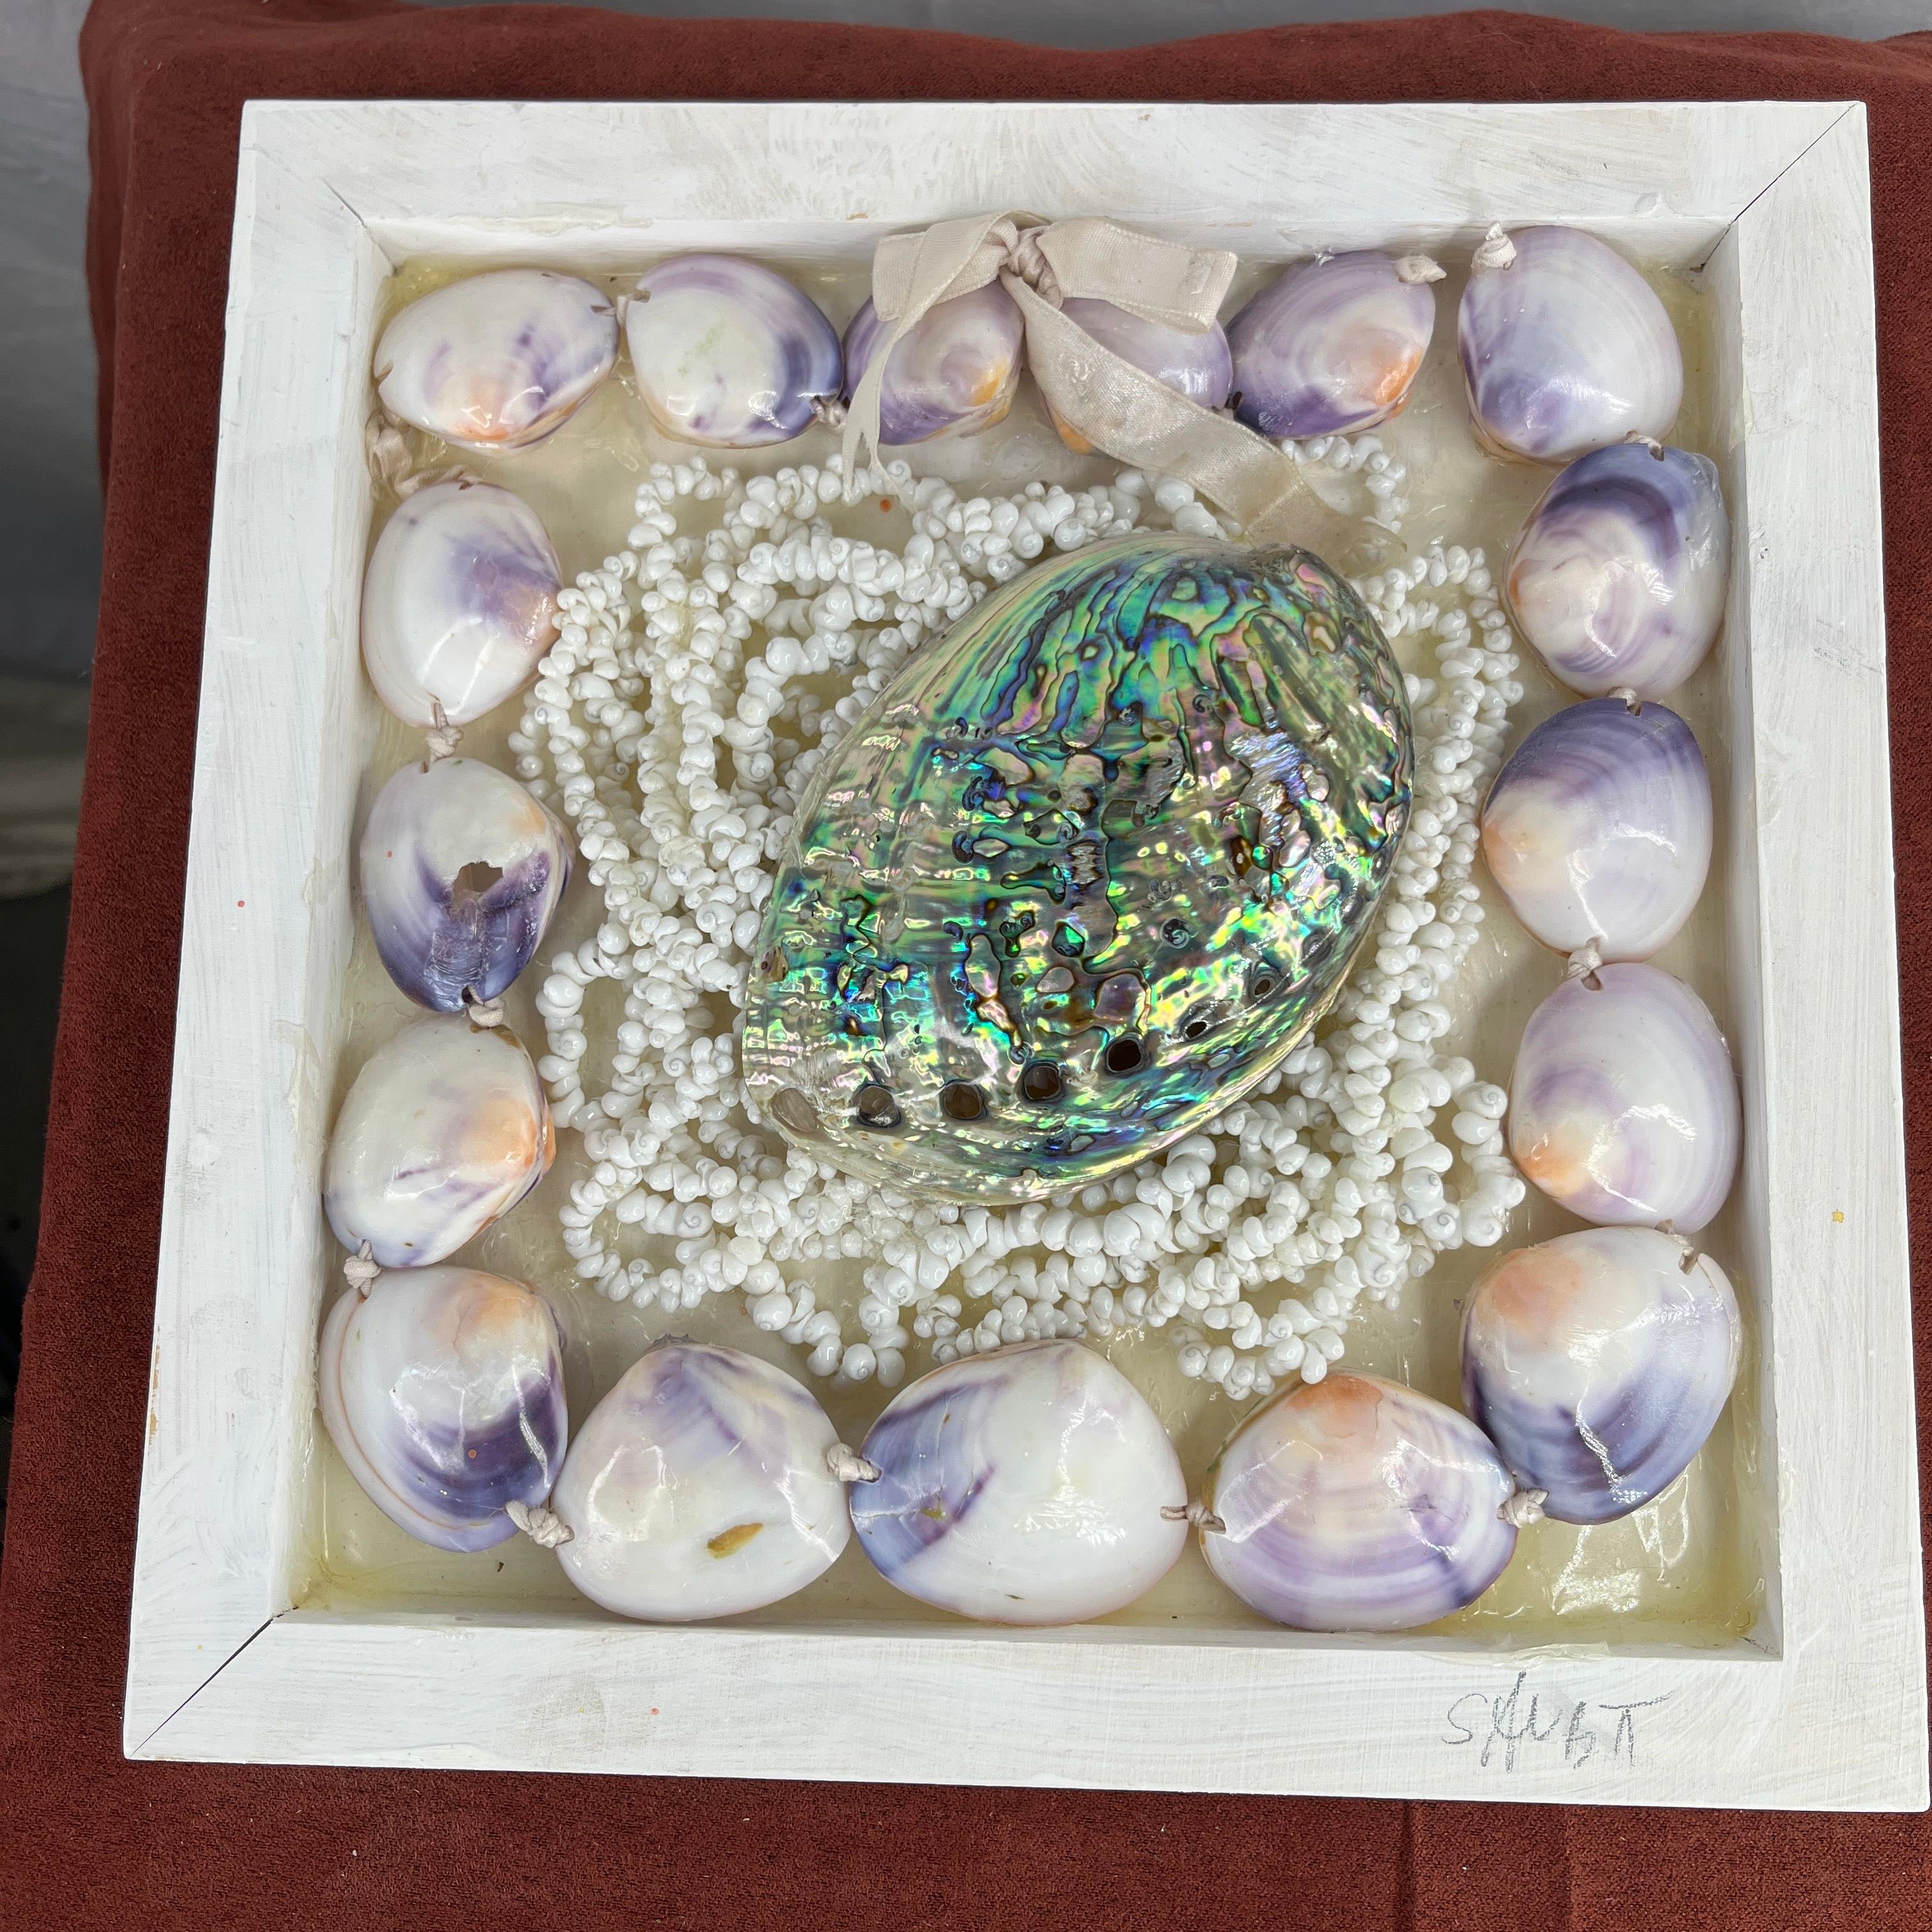 Iridescent Maui Necklace 3D Shell Collage by Sue Binkley Tatum 2016 Wall Art